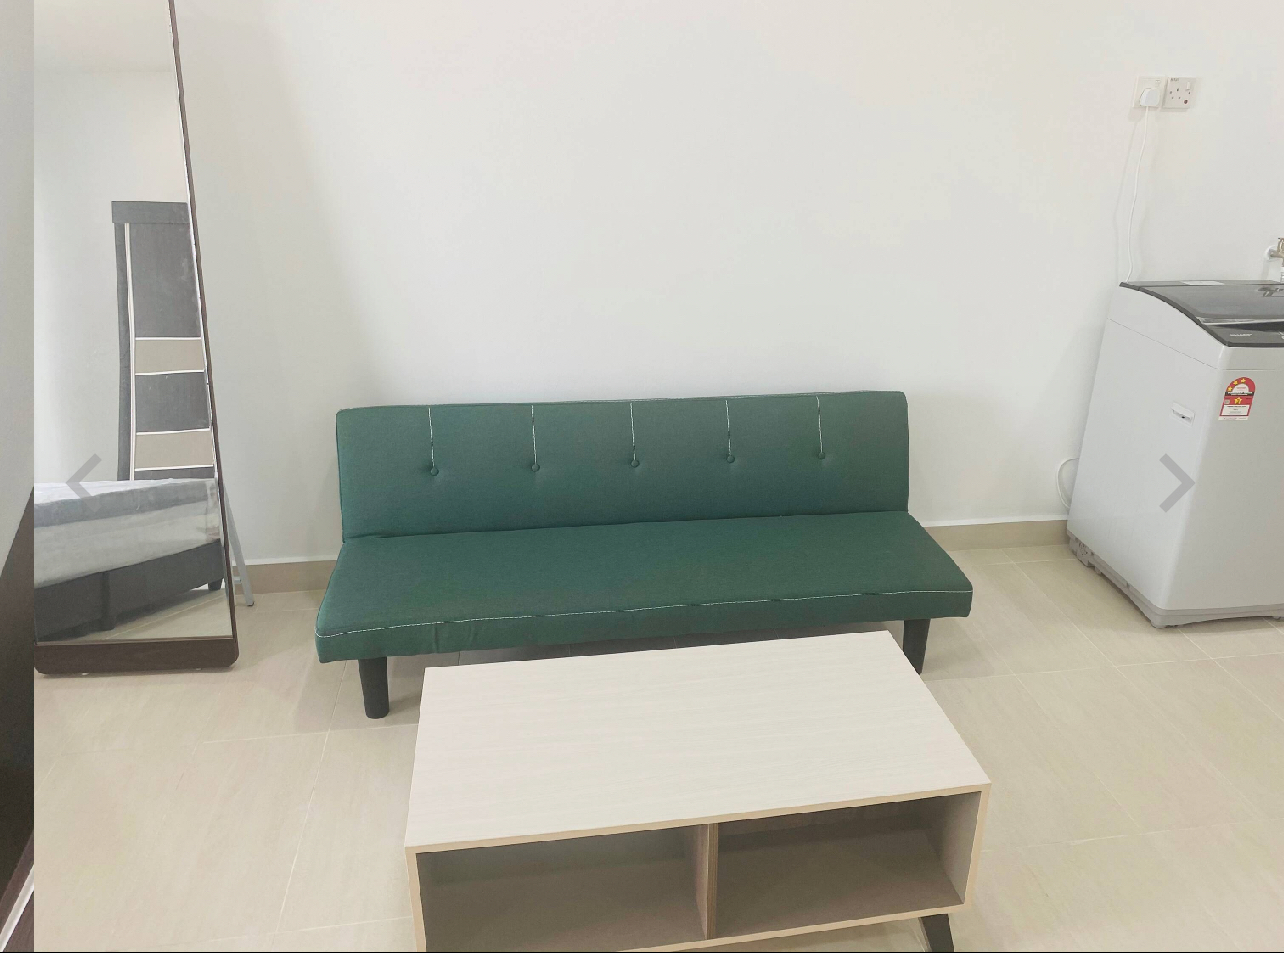 room for rent, studio, caltex laloh, Send the owner a message on WhatsApp/facebook if you want to RENT the unit(Mohammed Nhat)&Telegram(@muhammednhat101)